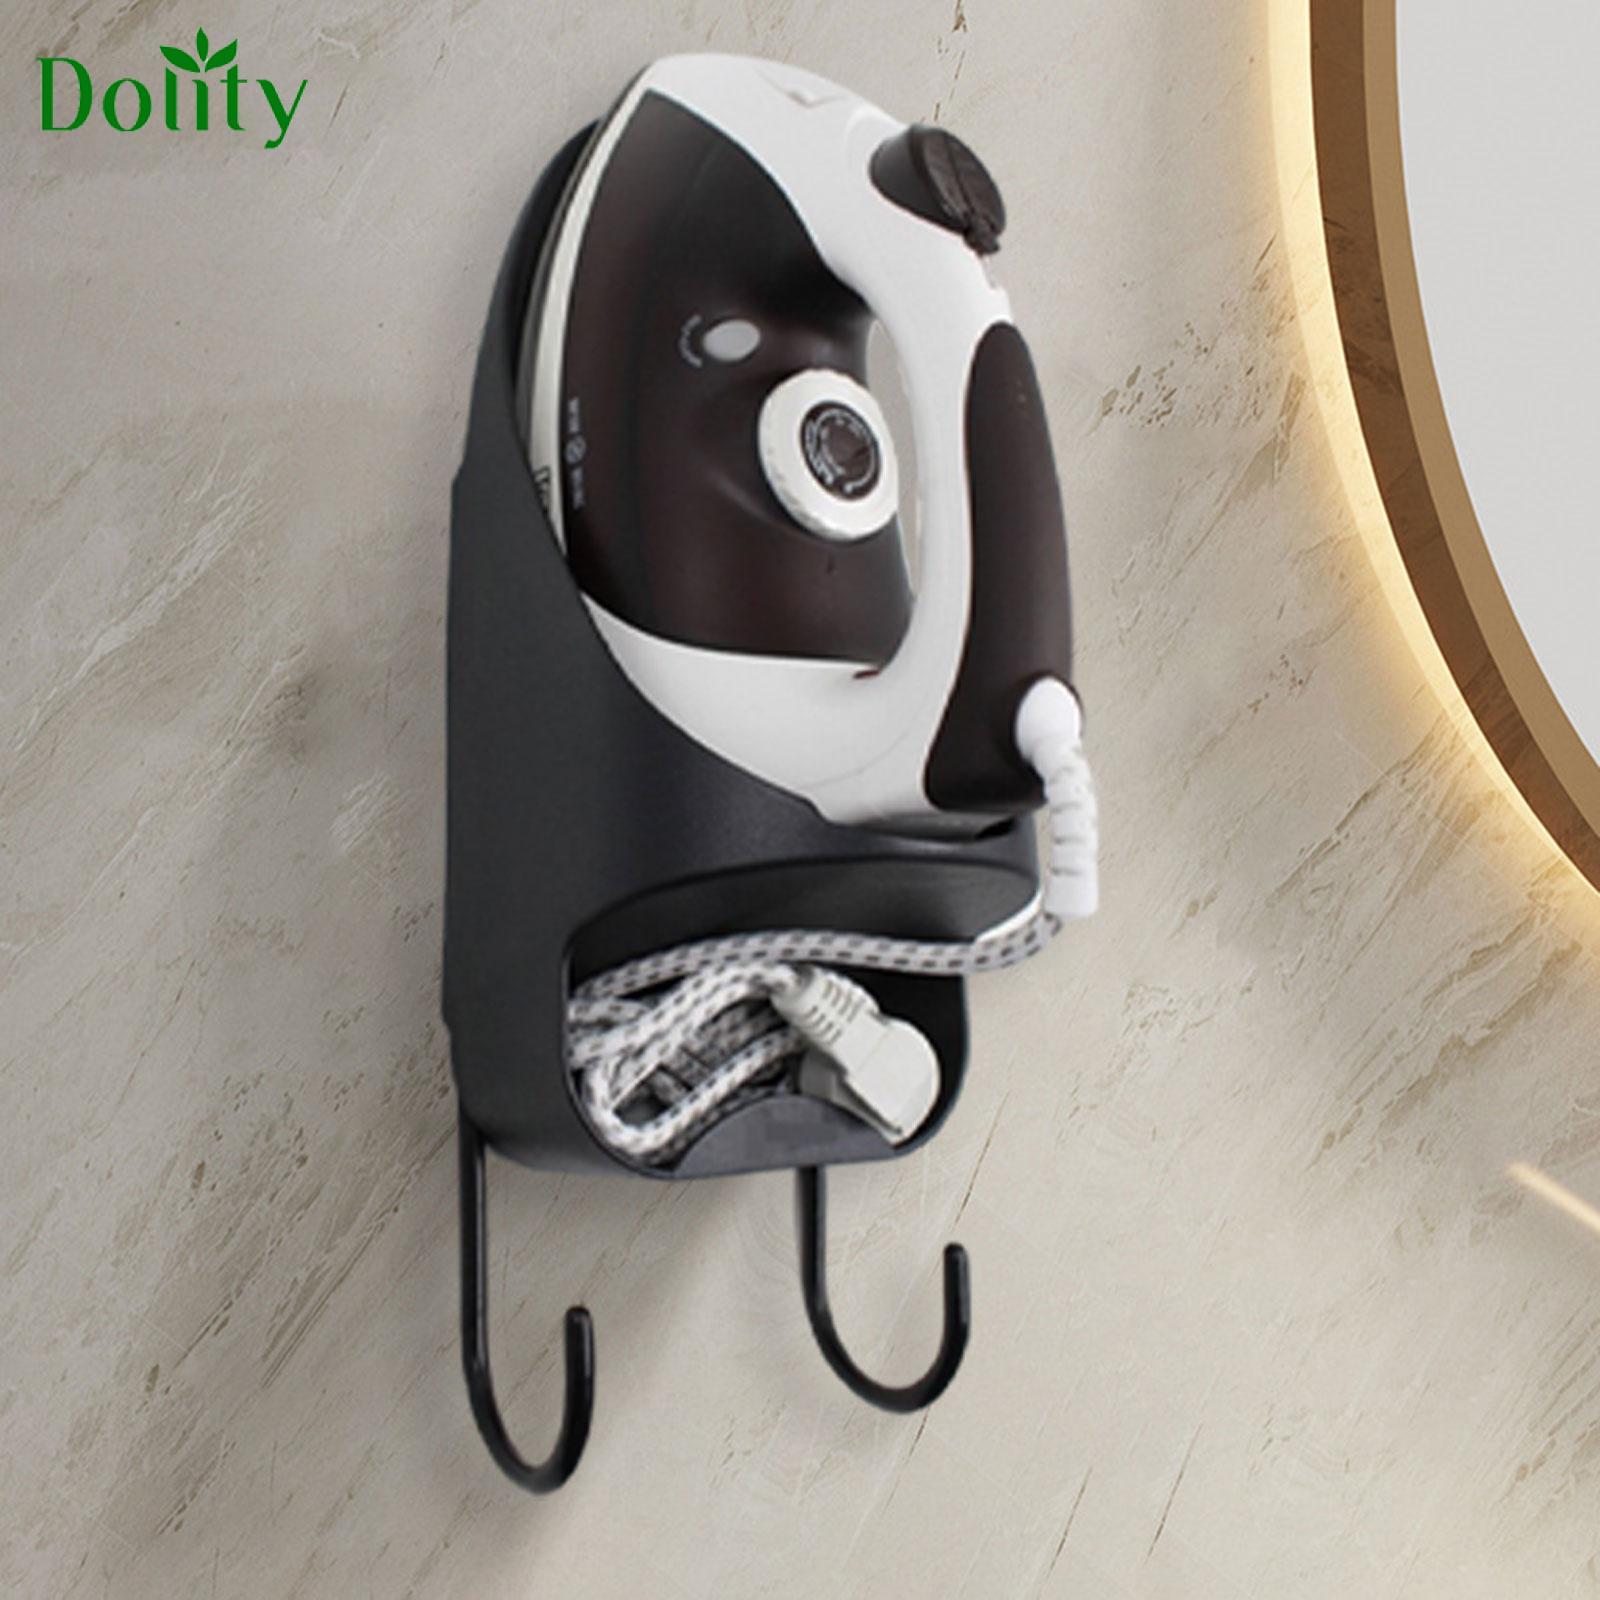 Dolity Ironing Board Holder Iron and Ironing Board Storage Wall Mount for